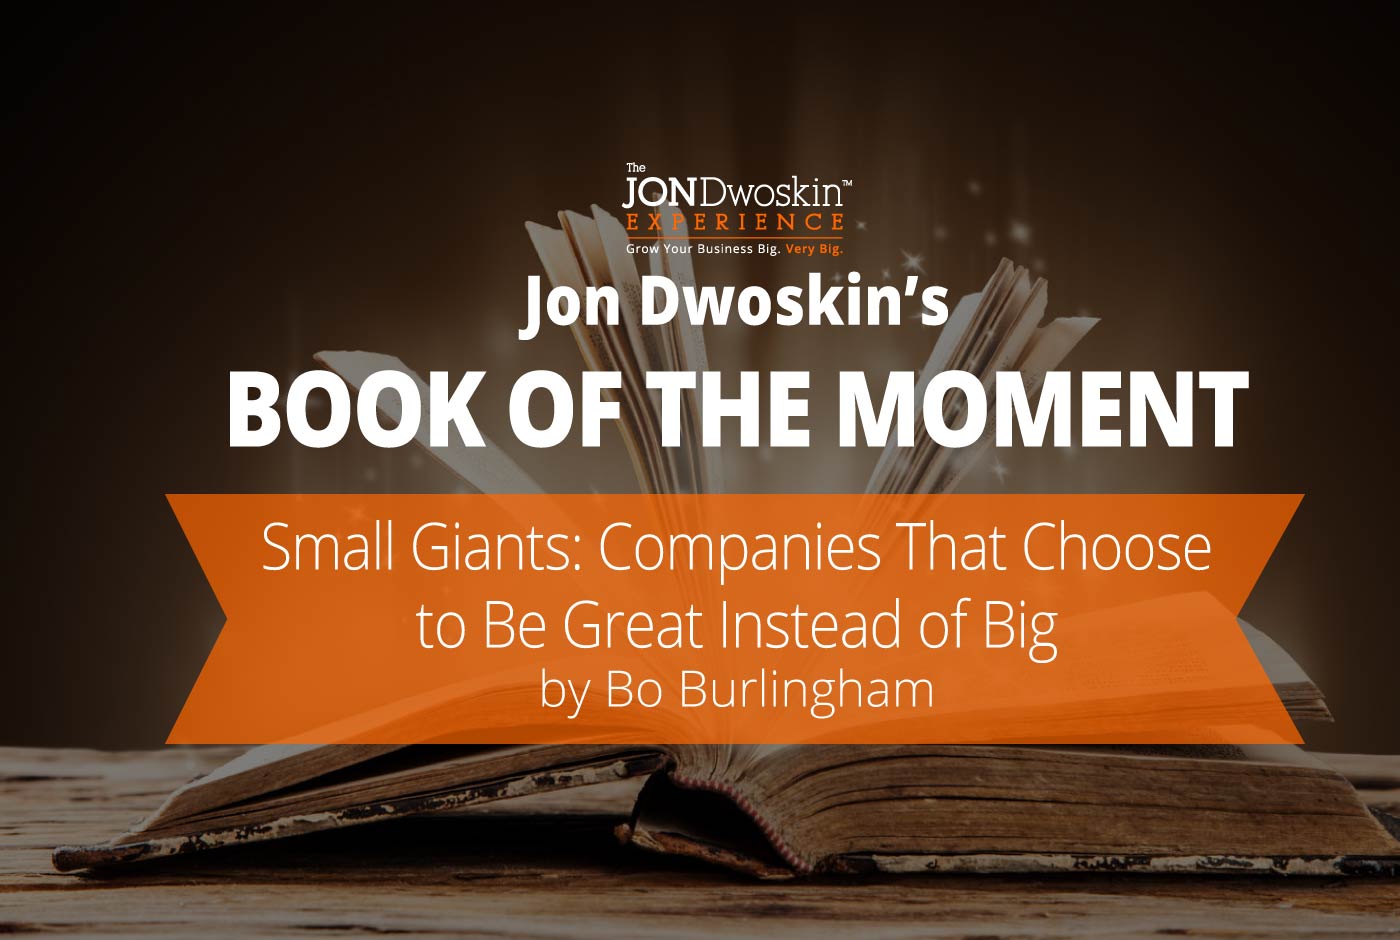 Jon Dwoskin's Book of the Moment: Small Giants